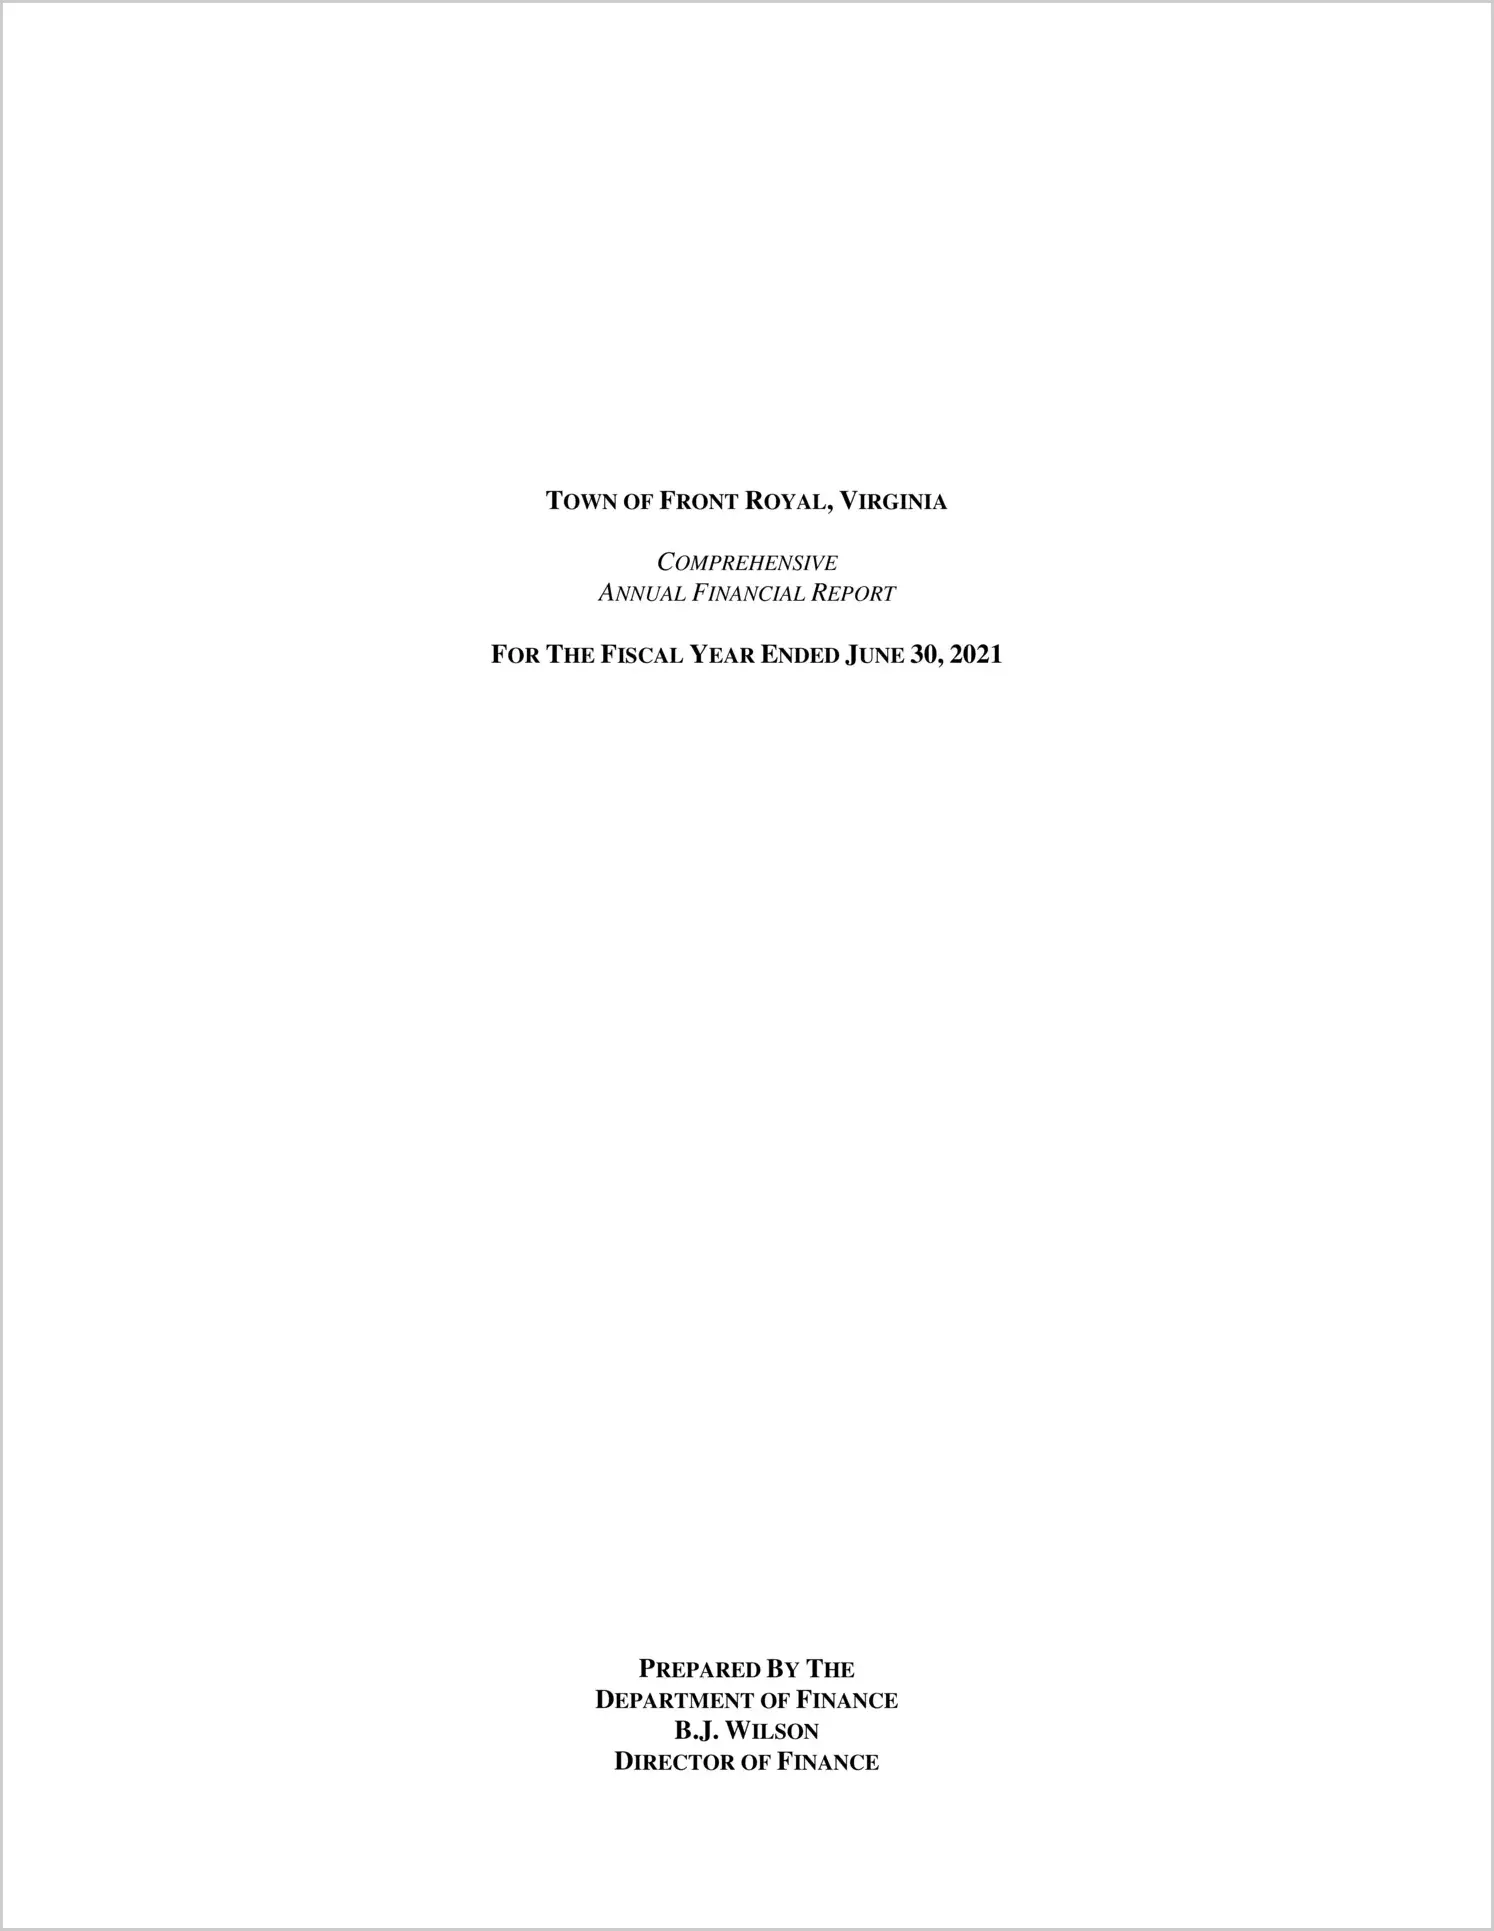 2021 Annual Financial Report for Town of Front Royal